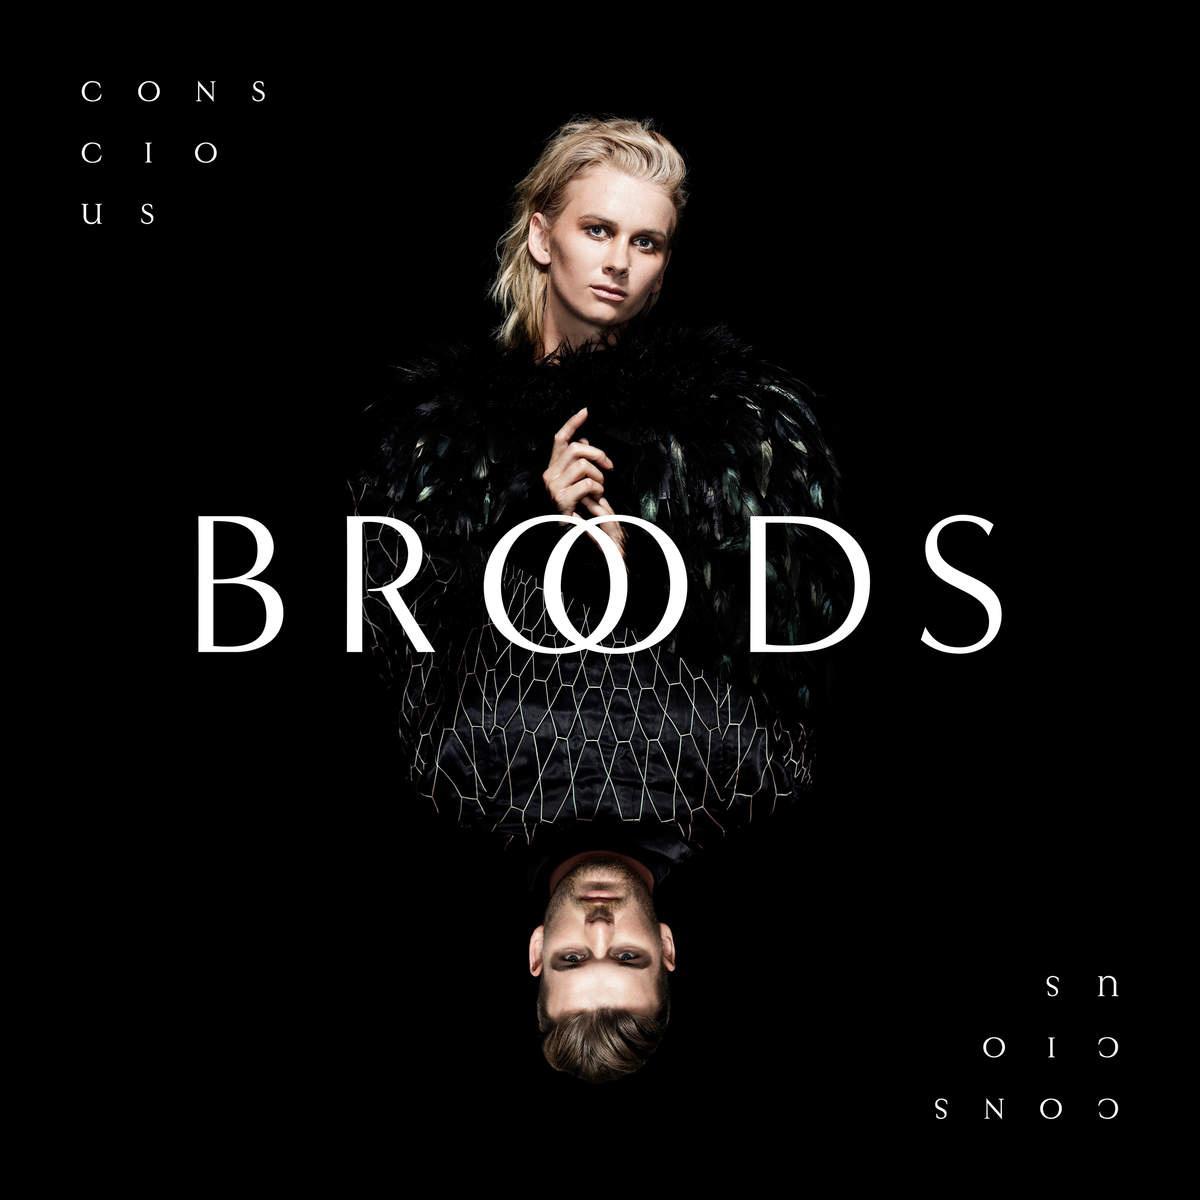 BROODS - Worth The Fight